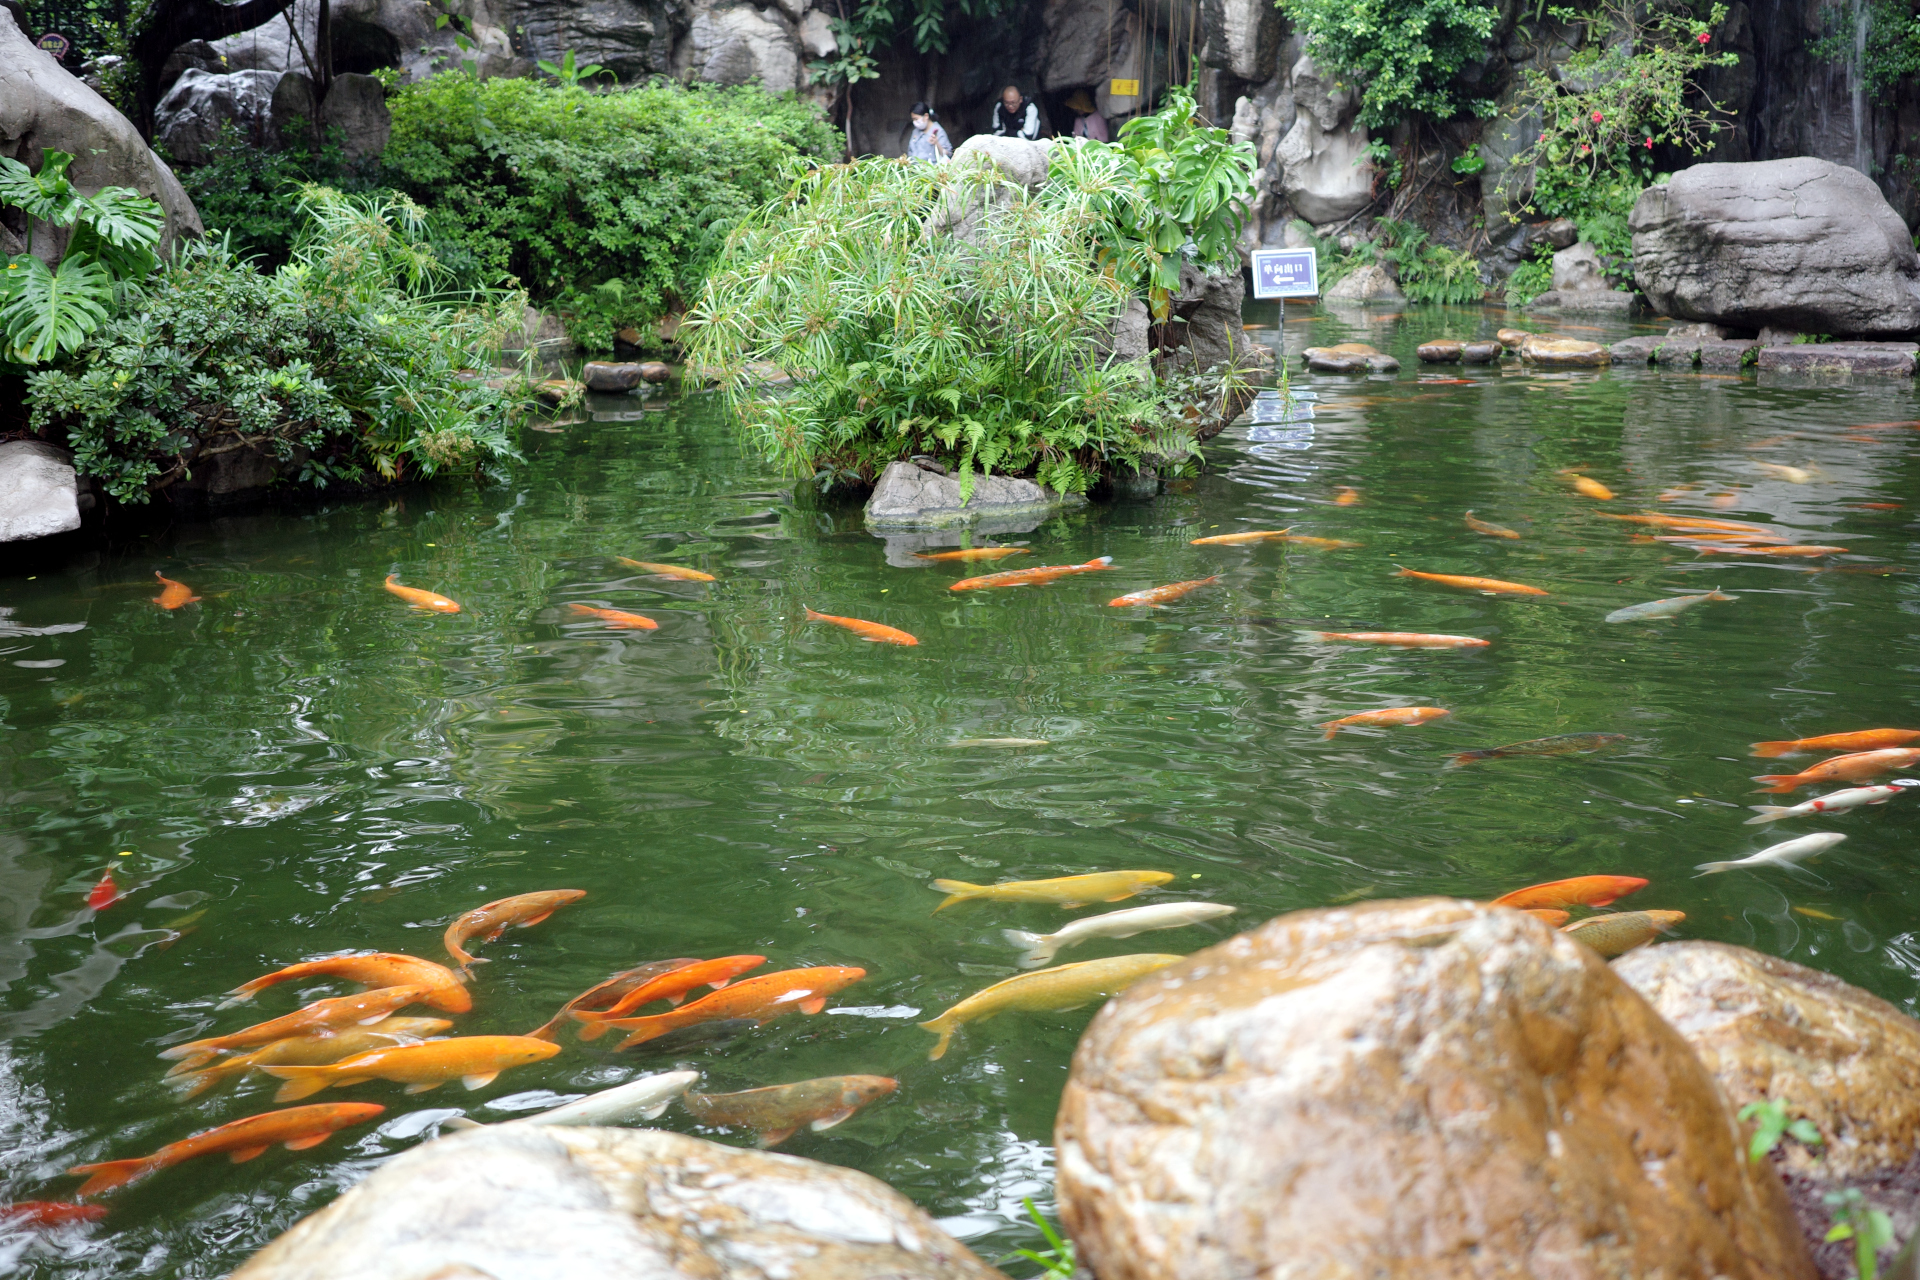 A school of fish in a pond